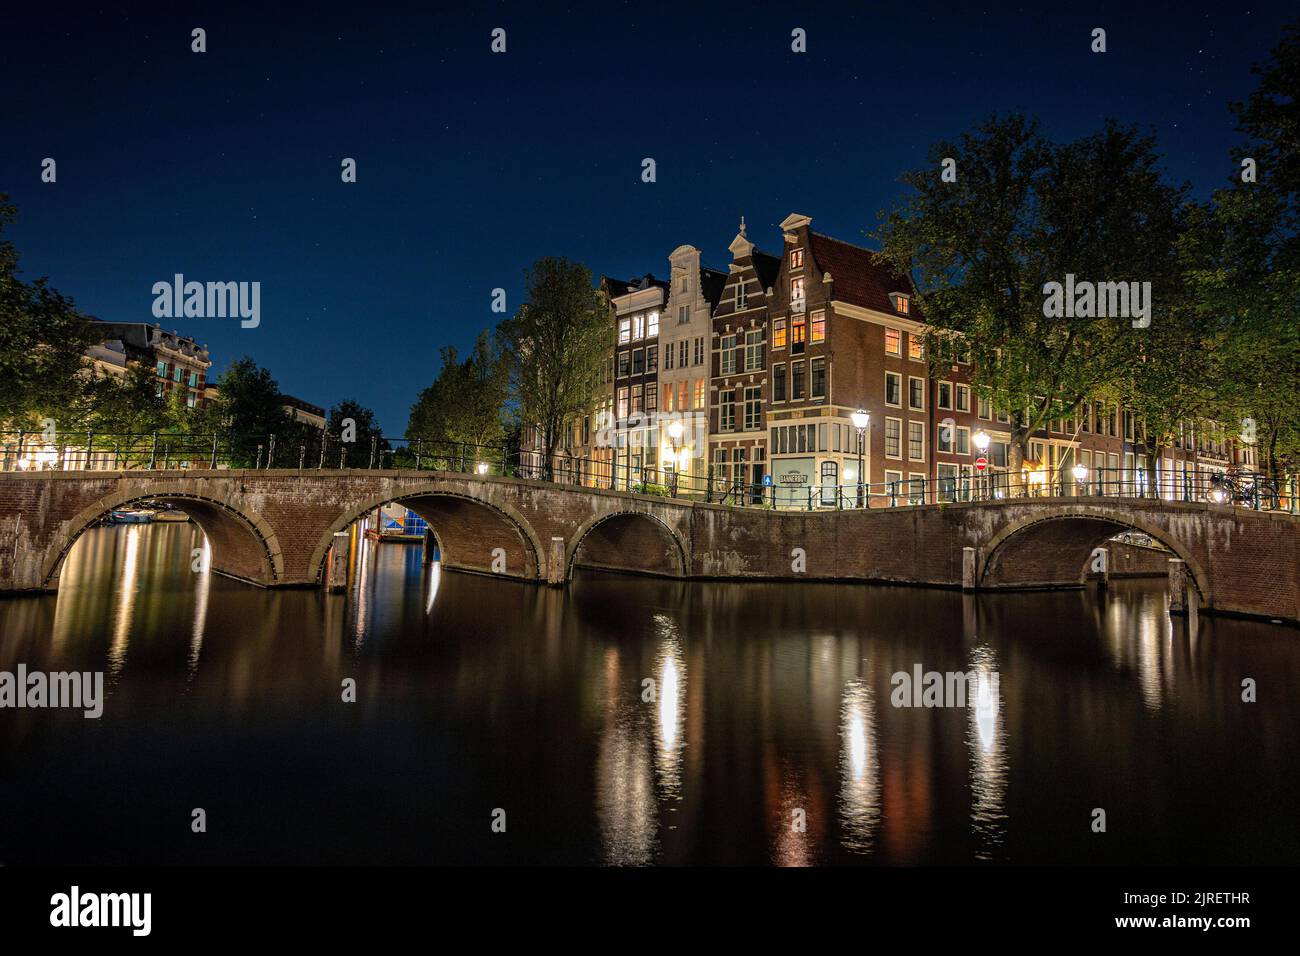 The crossing of Leidsegracht and Keizersgracht canals in Amsterdam. Stock Photo